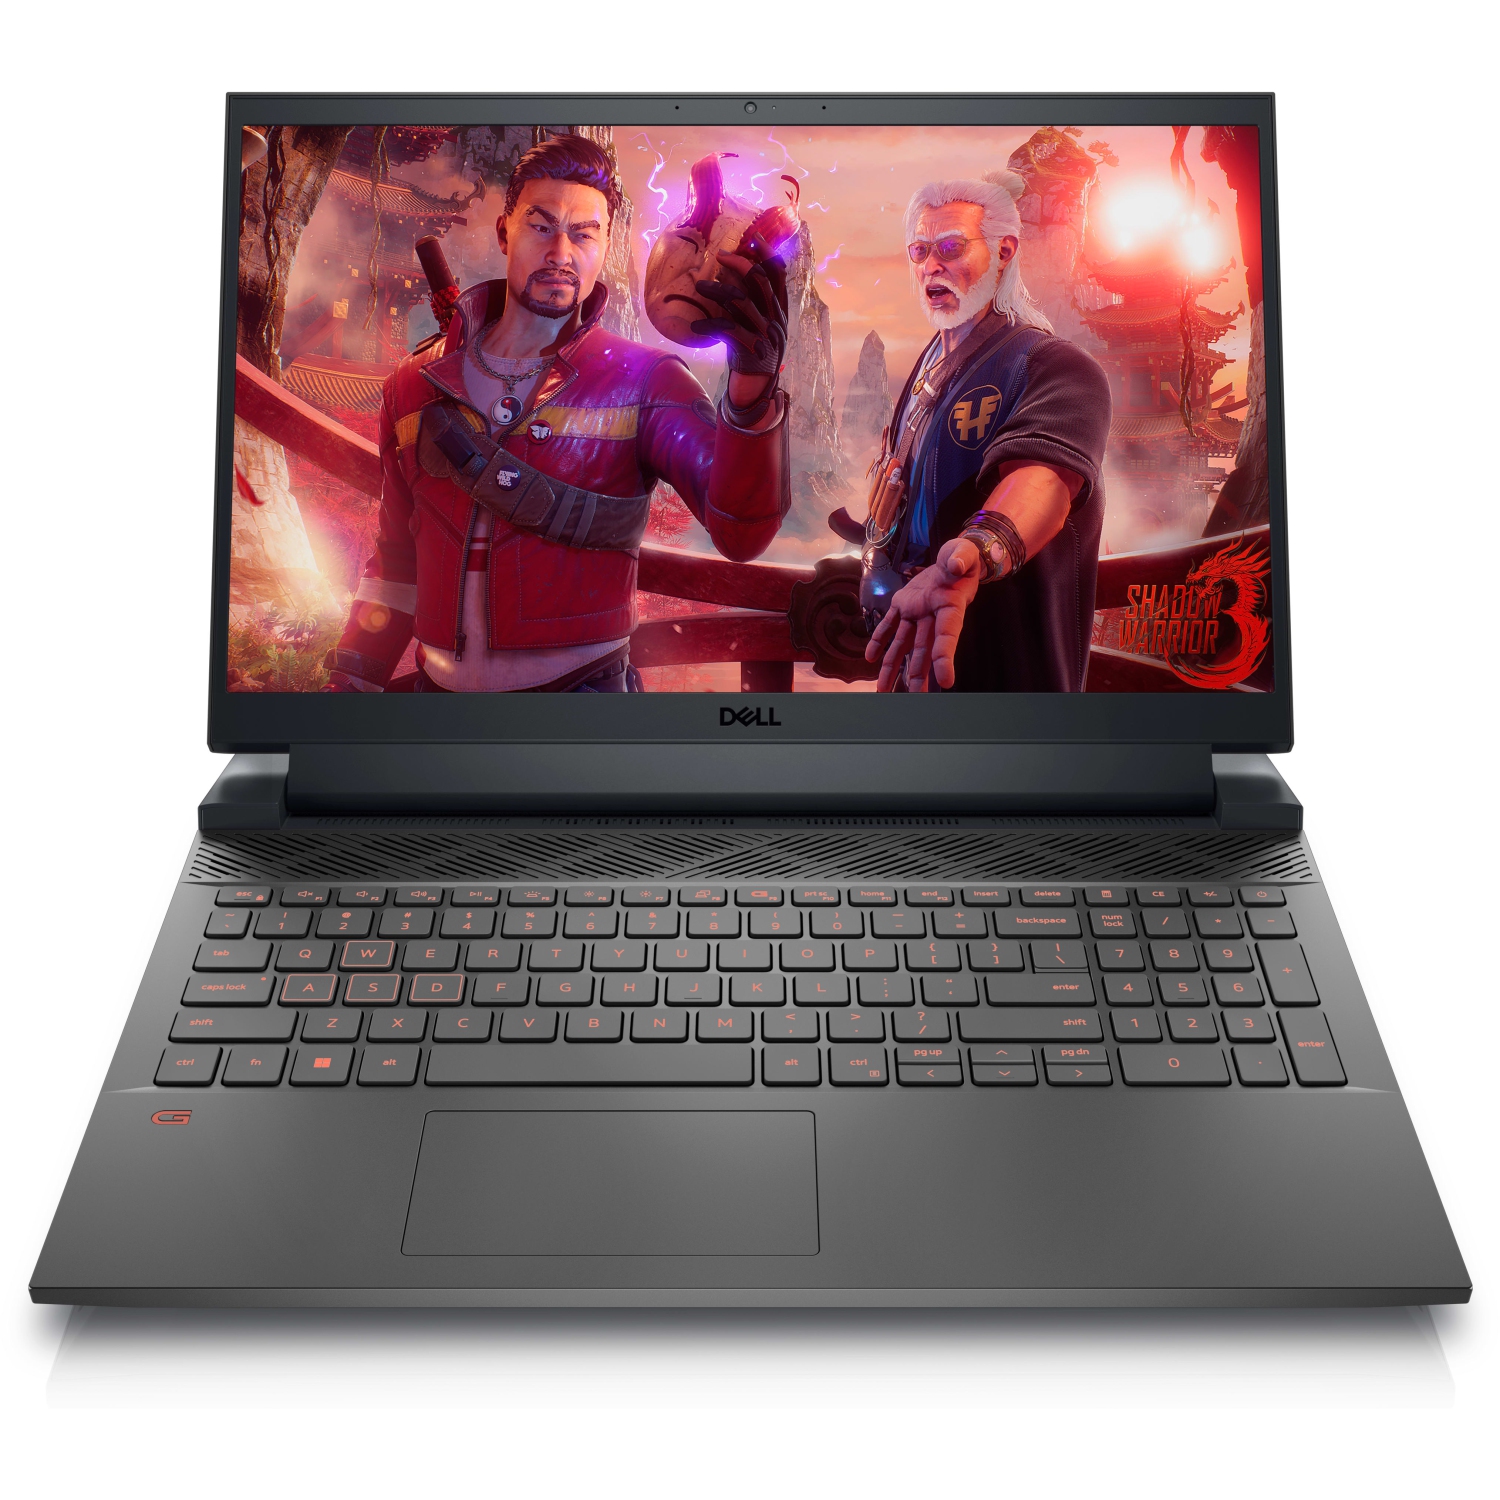 Refurbished (Excellent) – Dell G15 5525 Gaming Laptop (2022) | 15.6" FHD | Core Ryzen 5 - 256GB SSD - 8GB RAM - RTX 3050 | 6 Cores @ 4.5 GHz